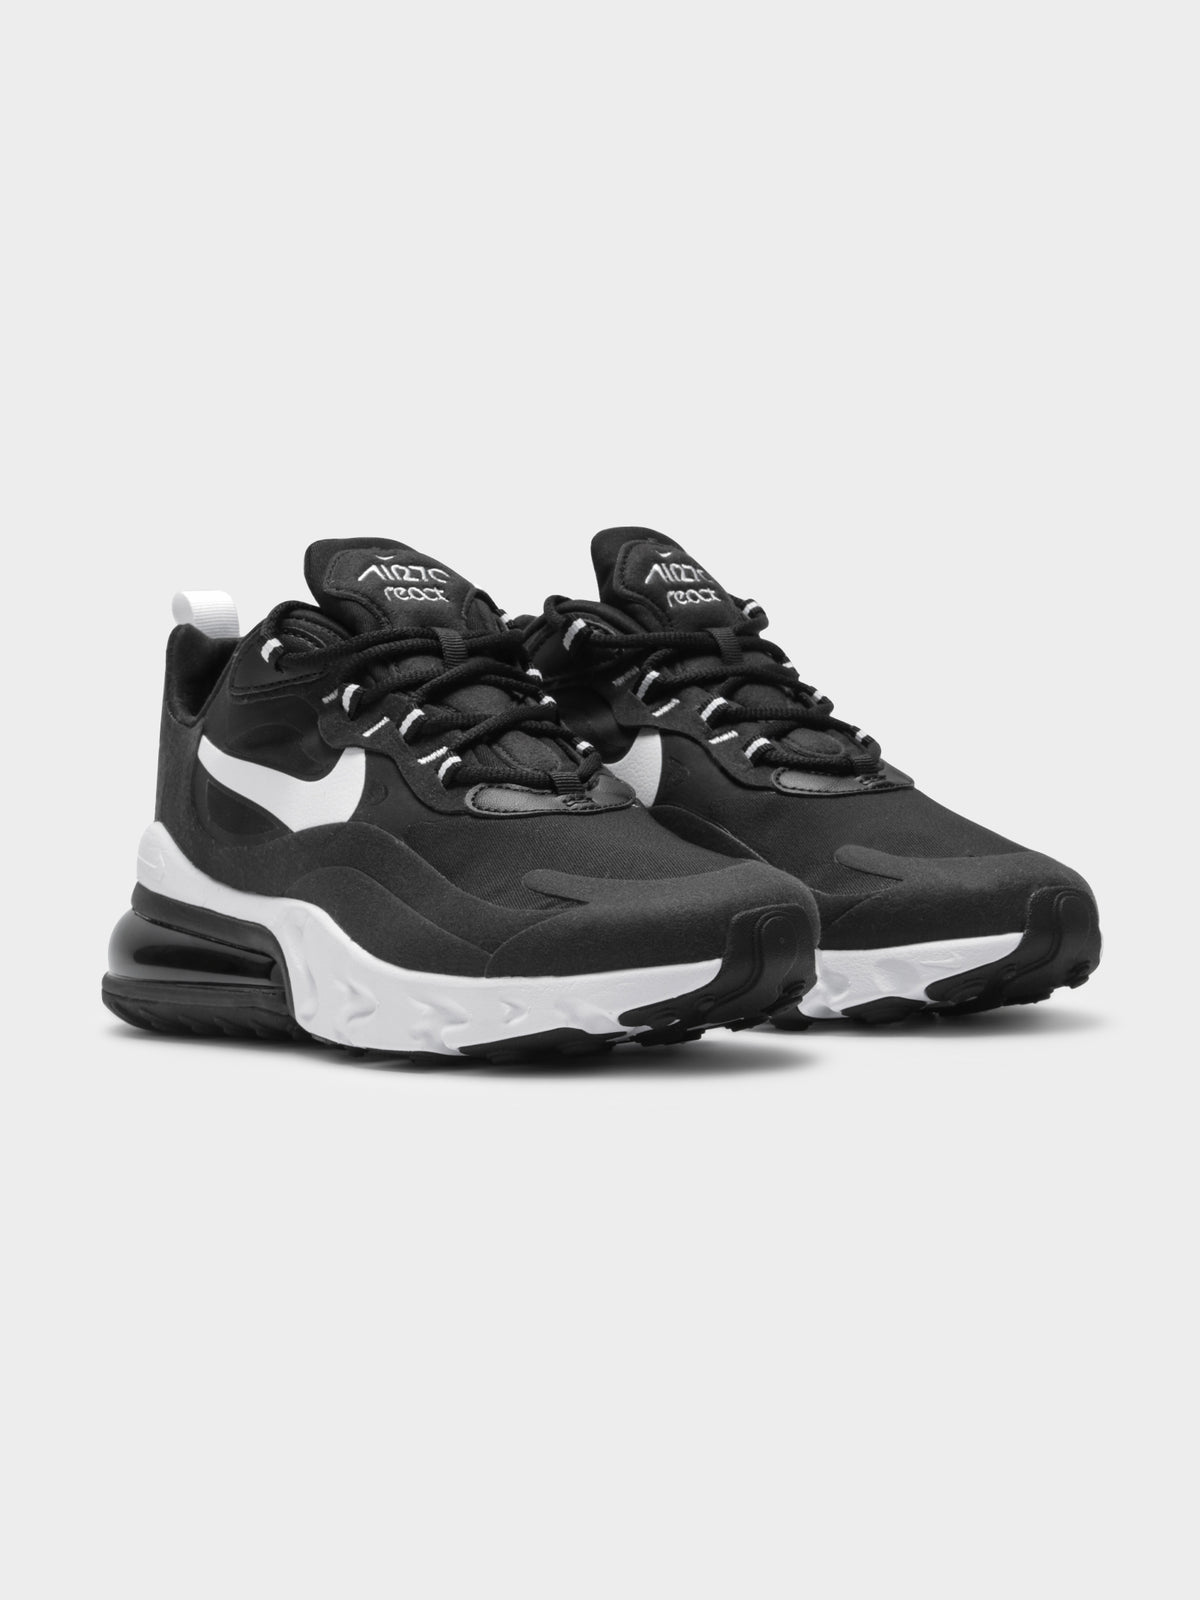 Womens Air Max React 270 Sneakers in Black &amp; White